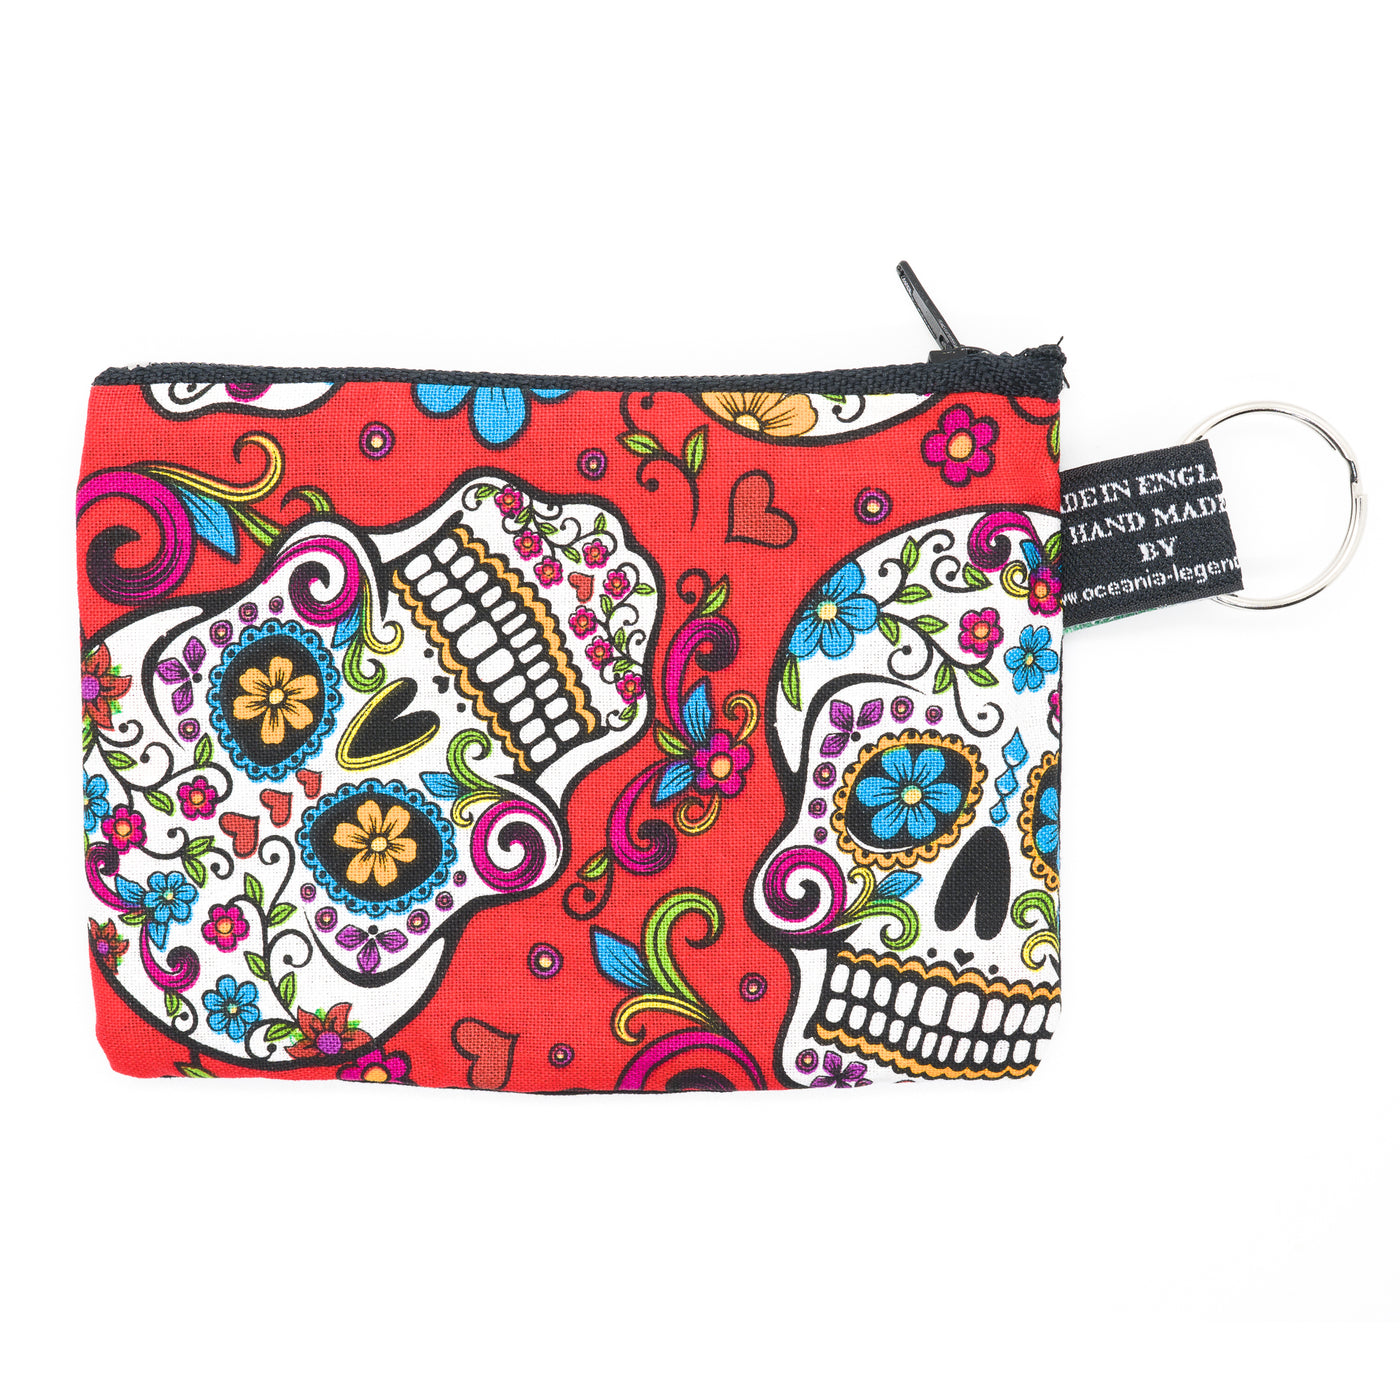 Bright Red Sugar Skull or Candy Skull zipped cotton purse